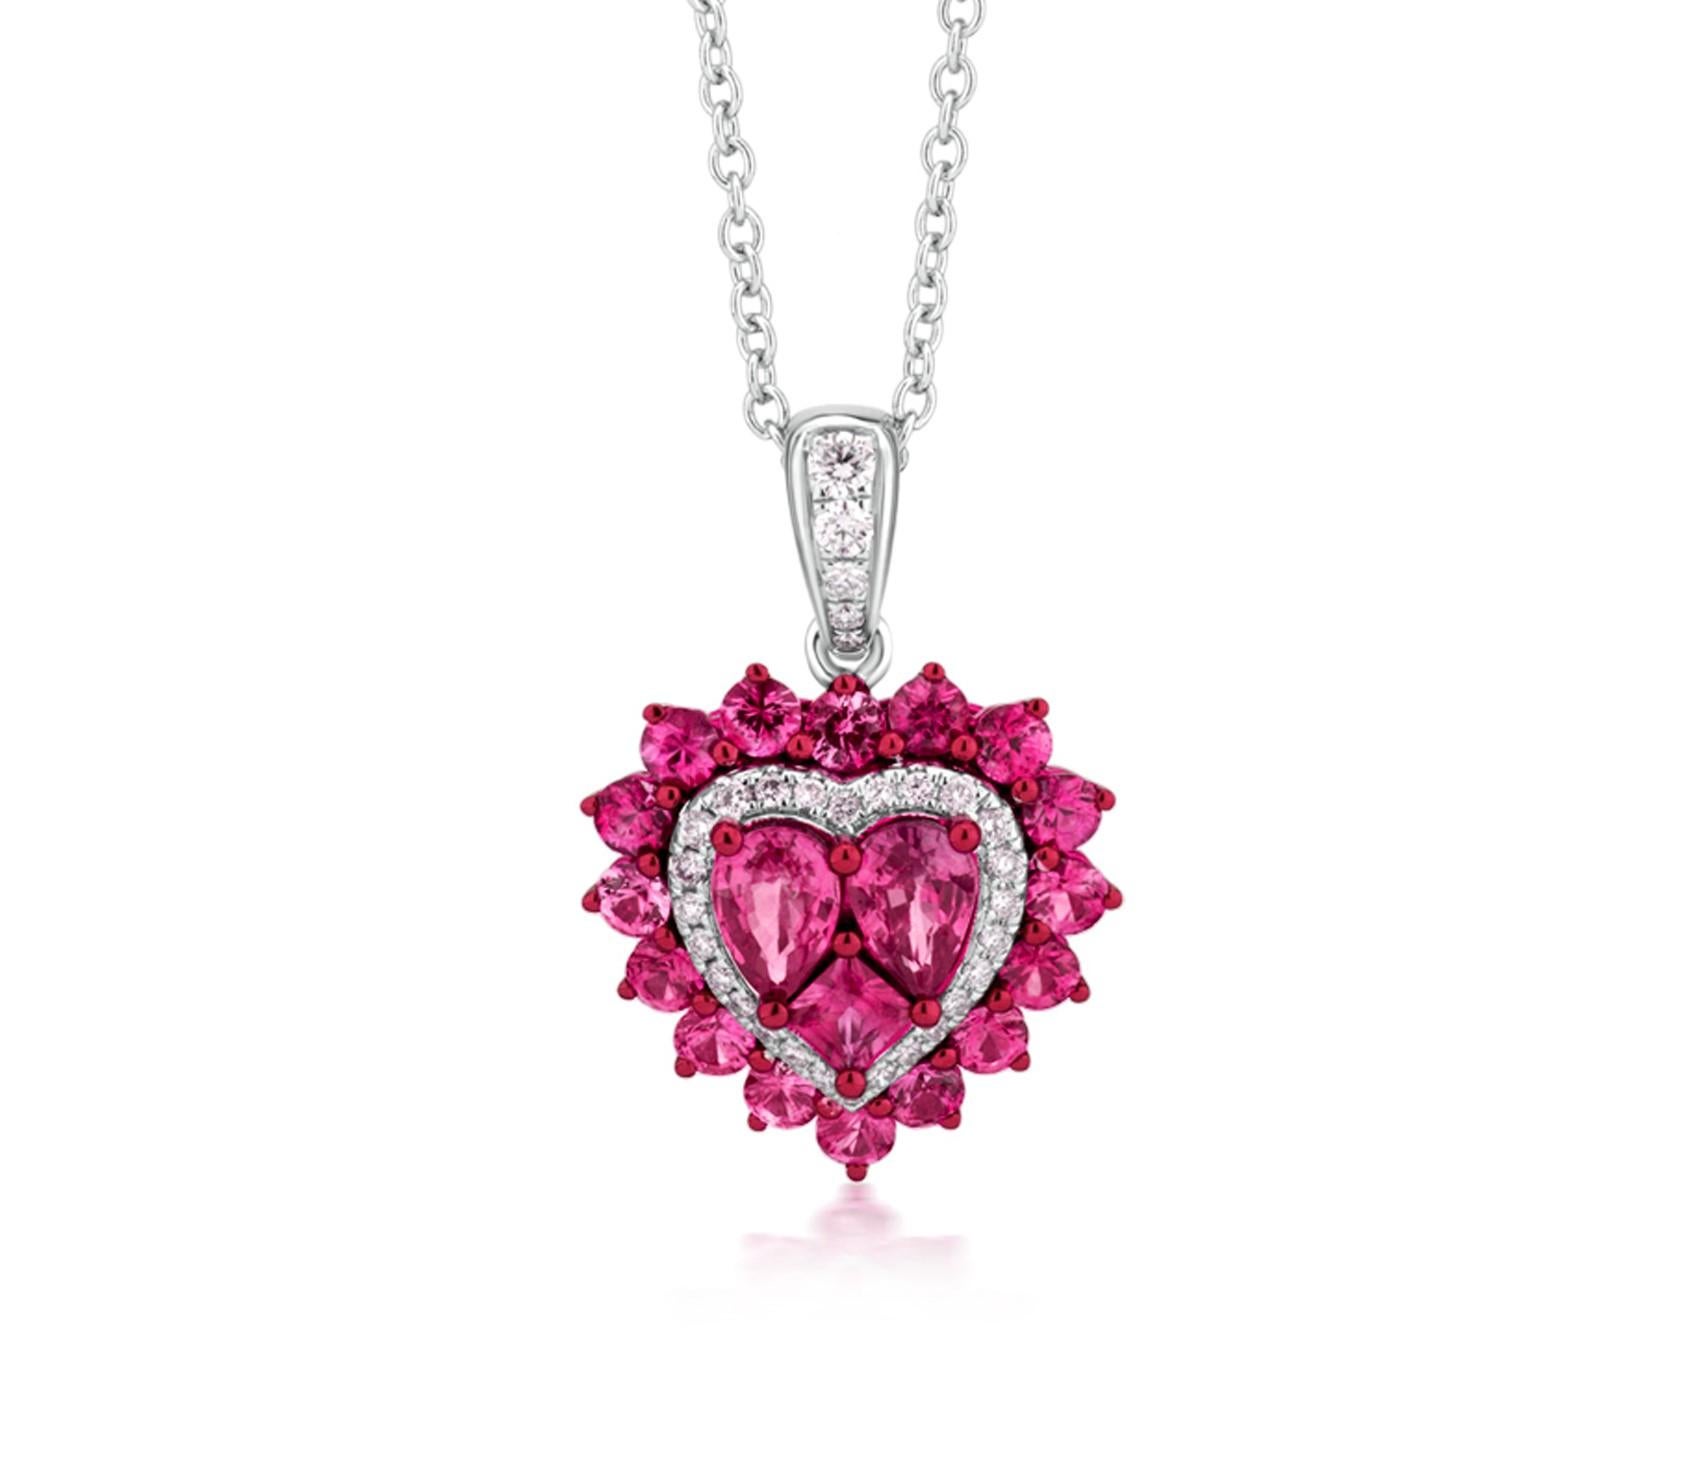 Contemporary Luxle 2.63 Cttw. Heart Pendant Necklace with Ruby and Diamond in 18K White Gold For Sale